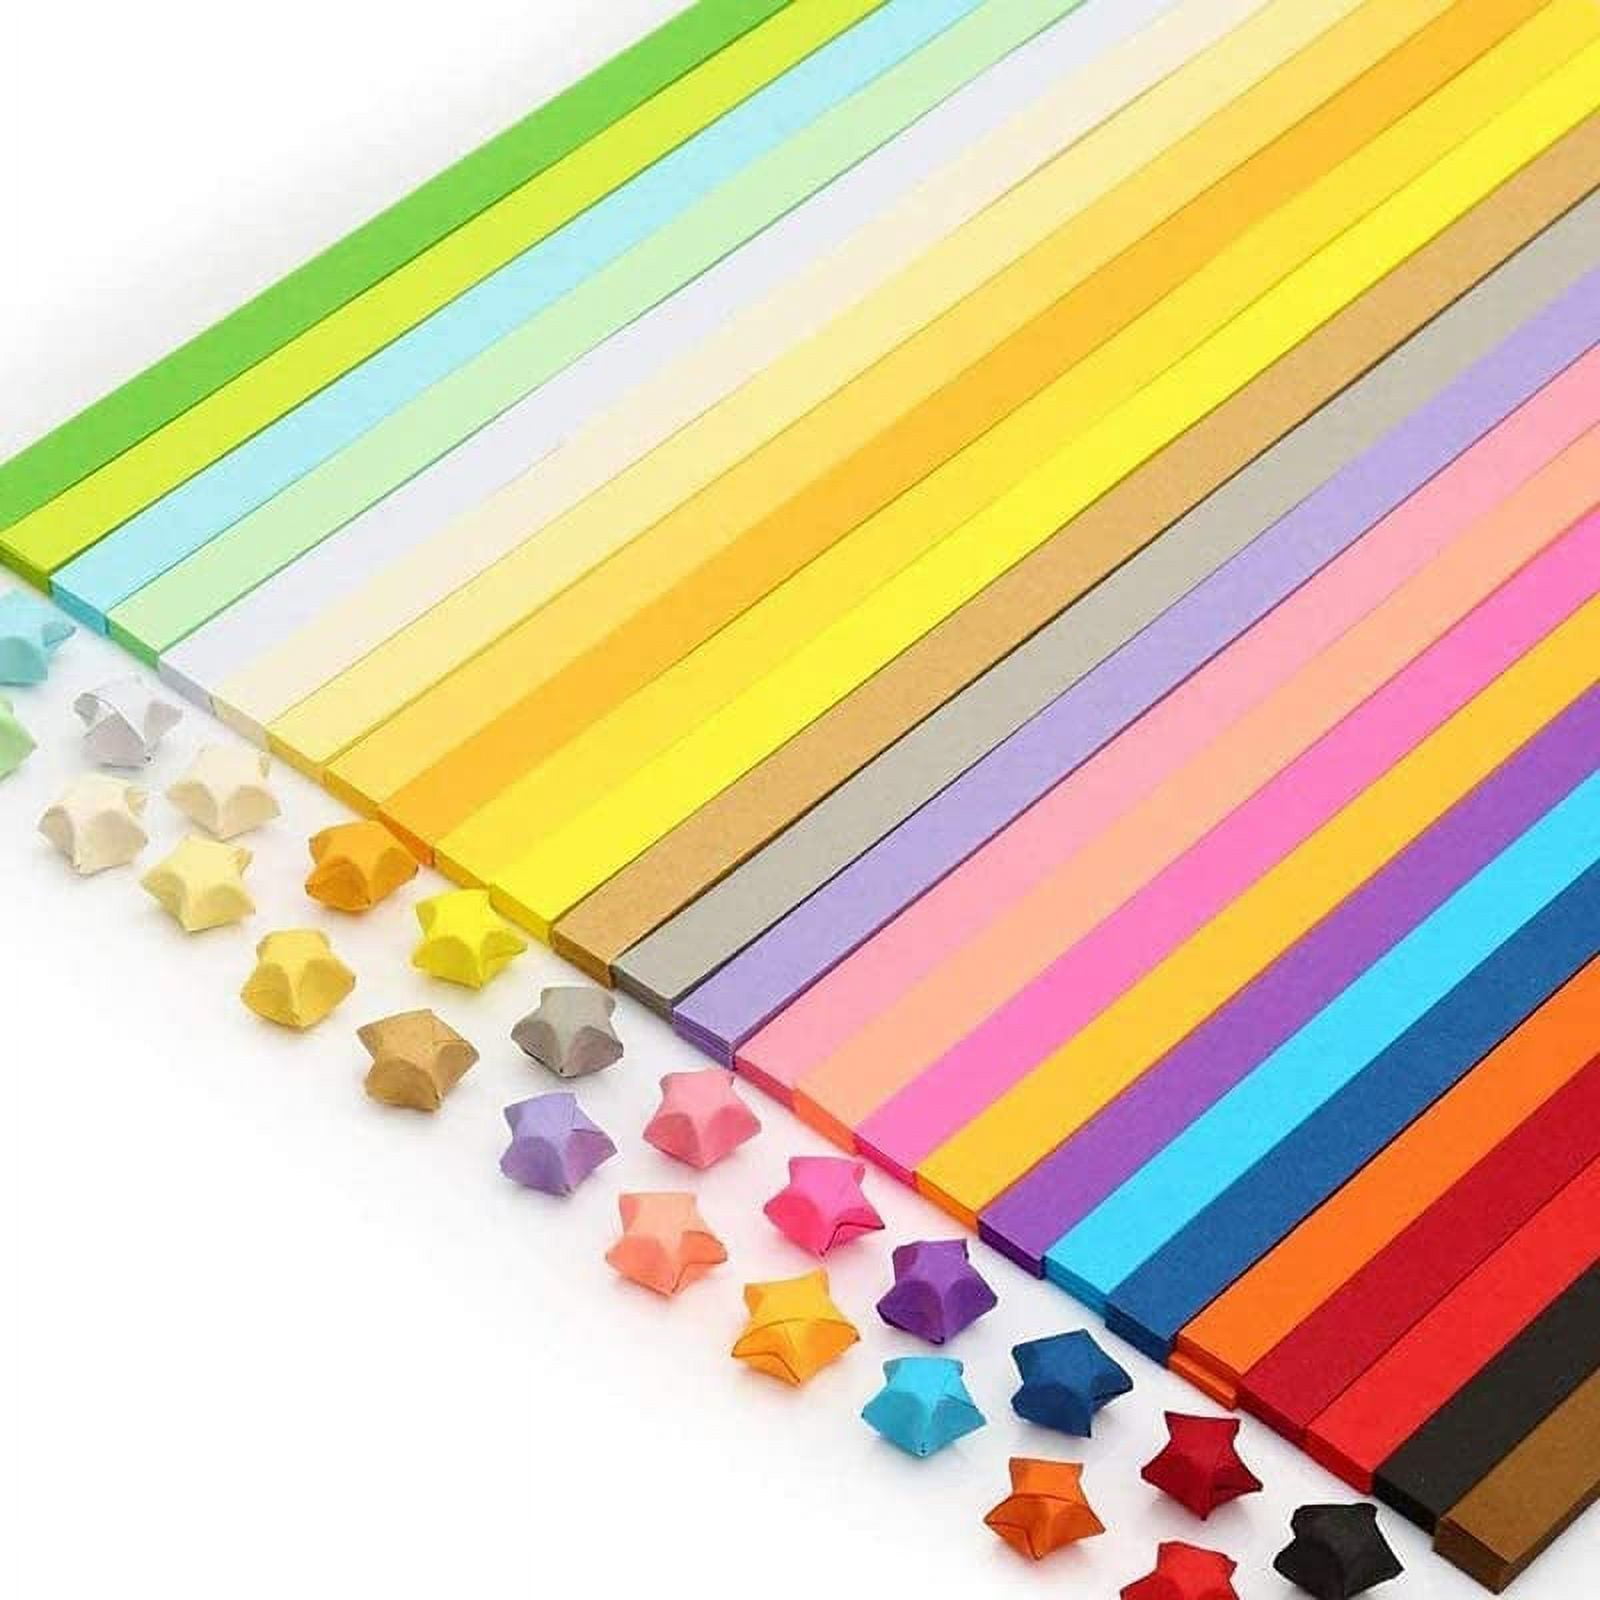 2700 Sheets Origami Stars Papers,Aierliusa Origami Star Paper Strip  Package, Origami Paper Stars, 27 Colors, 2700 Stripes 